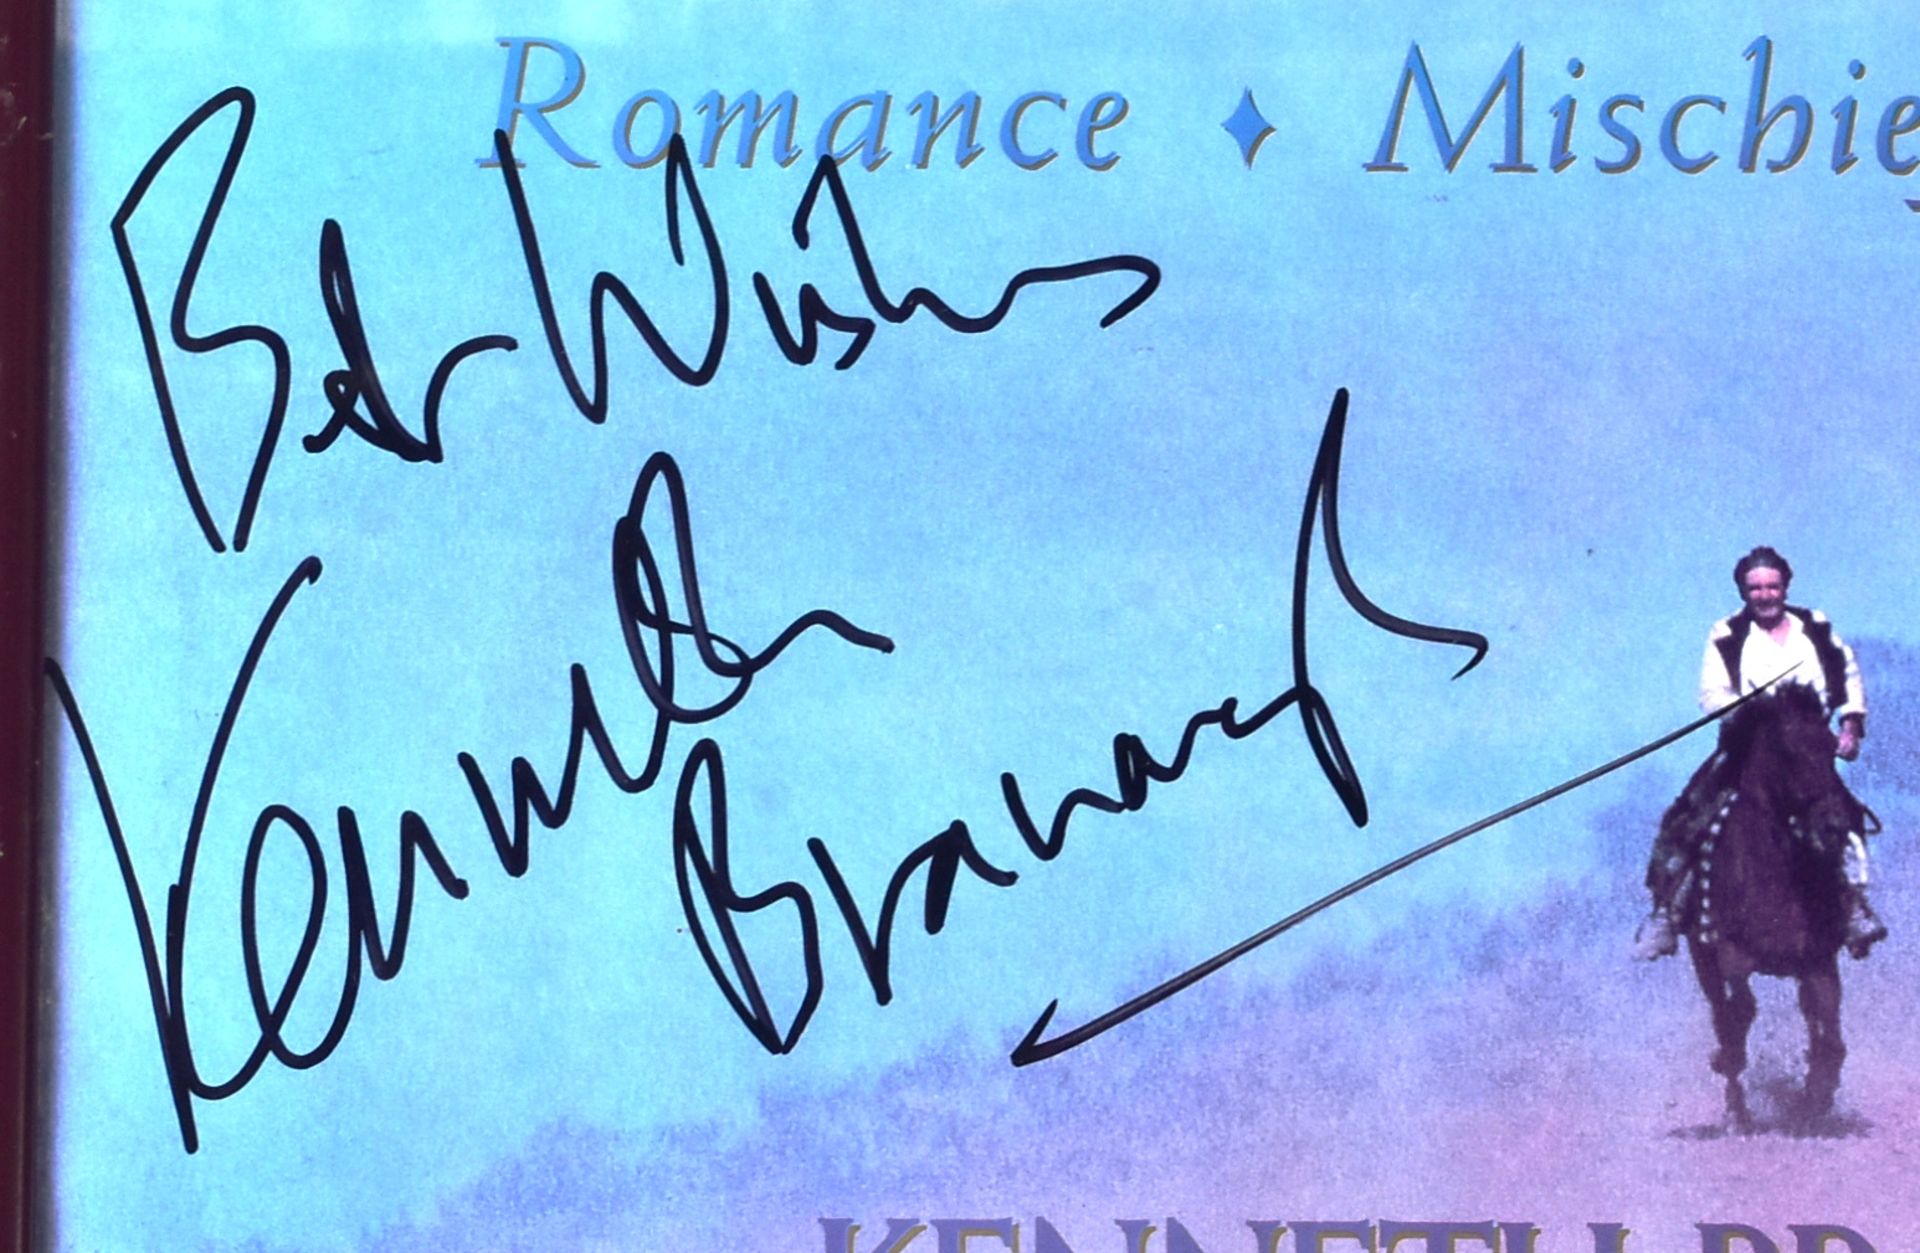 MUCH ADO ABOUT NOTHING (1993) - SIR KENNETH BRANAGH SIGNED POSTER - Image 2 of 3